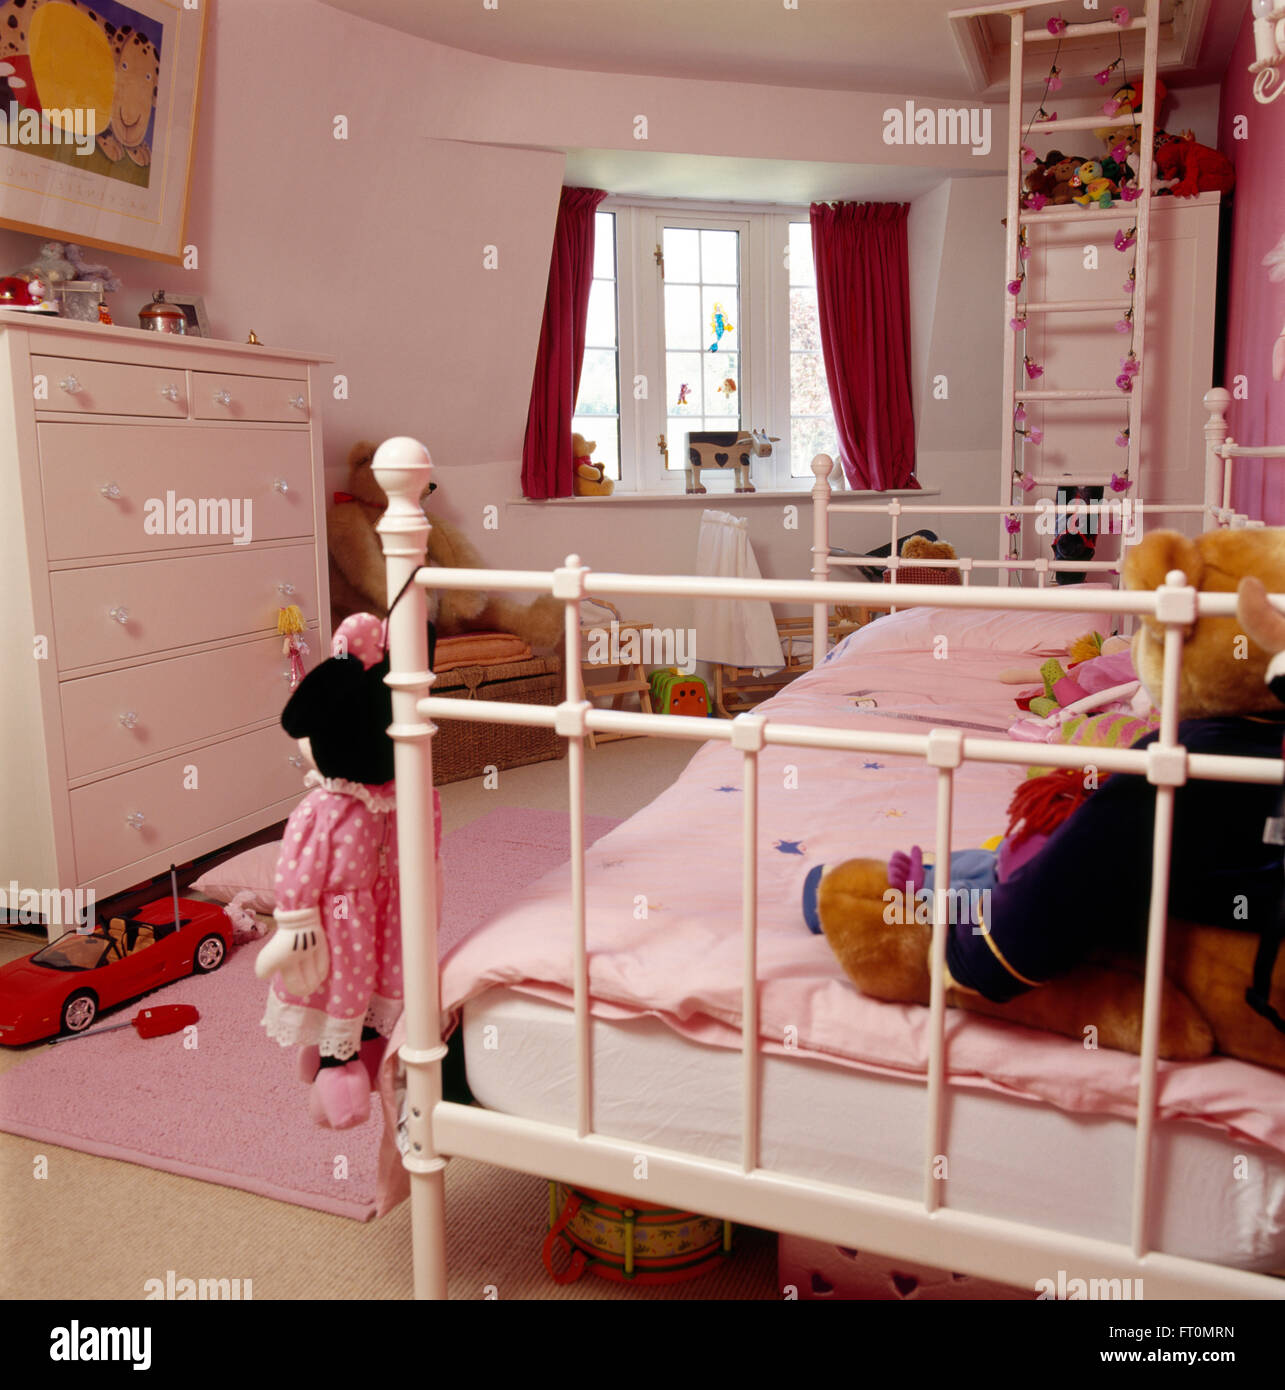 White painted metal bed with pink duvet in child's bedroom with a white ladder against the wall and a white chest of drawers Stock Photo